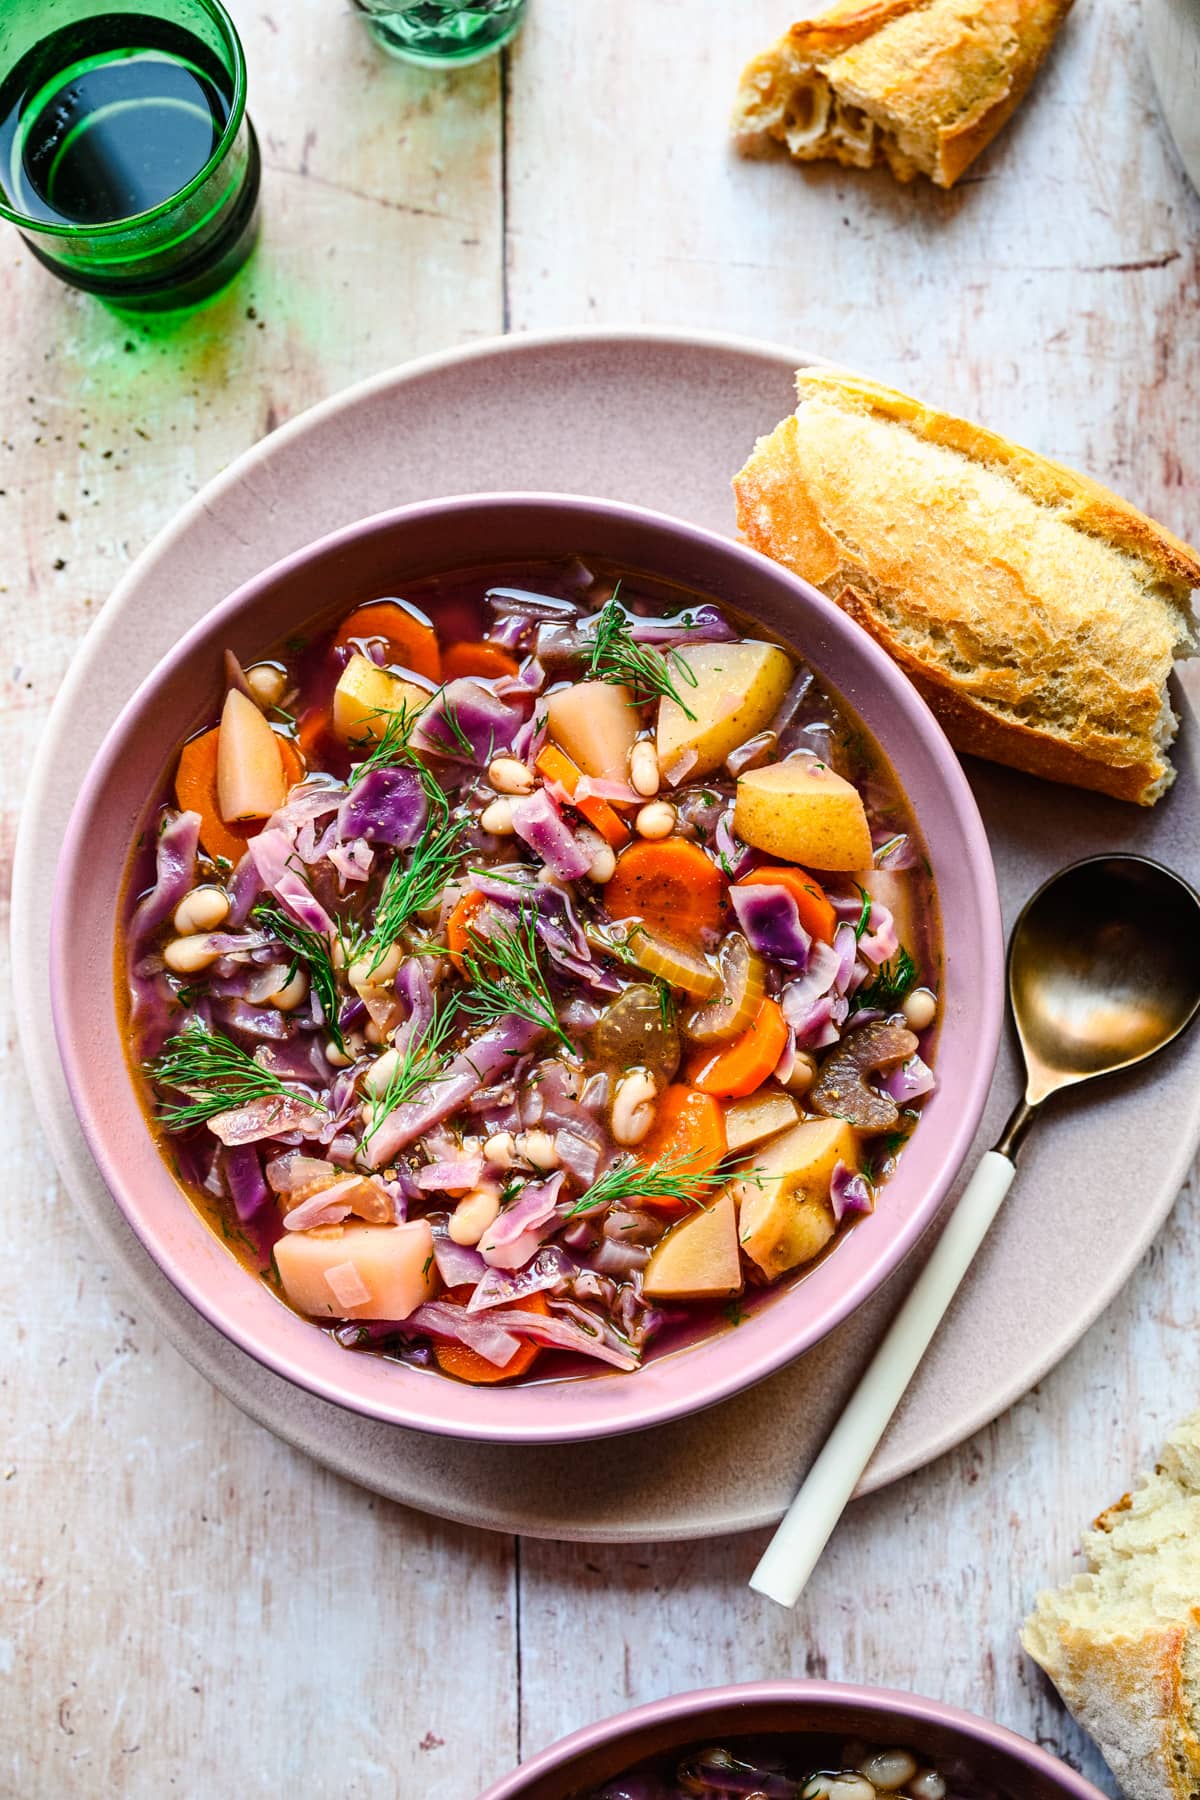 Finished red cabbage soup in a purple bowl served with bread.